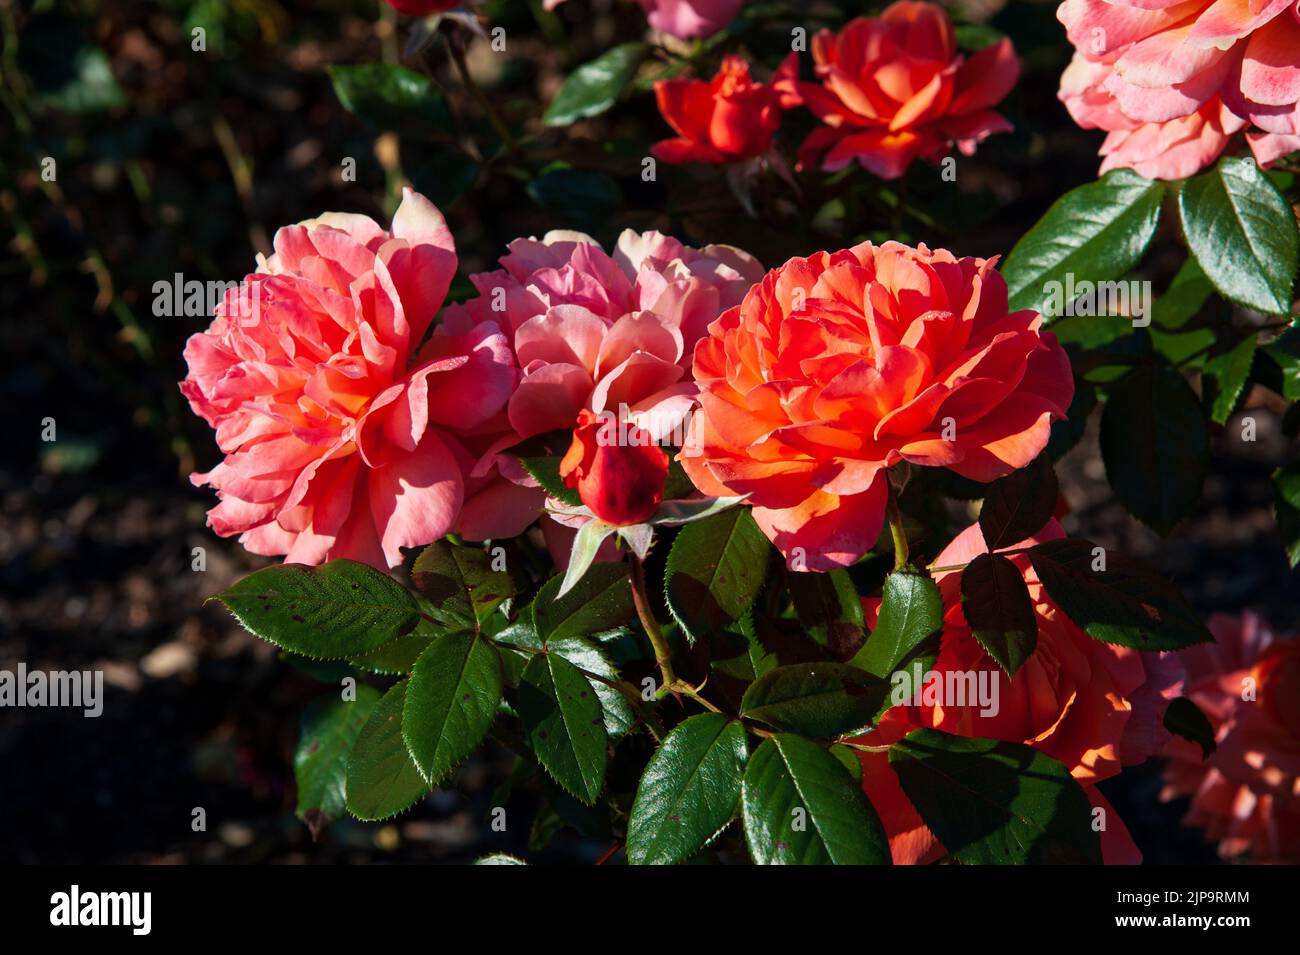 Beautiful pink and red roses blossom in the garden on a sunny day Stock Photo